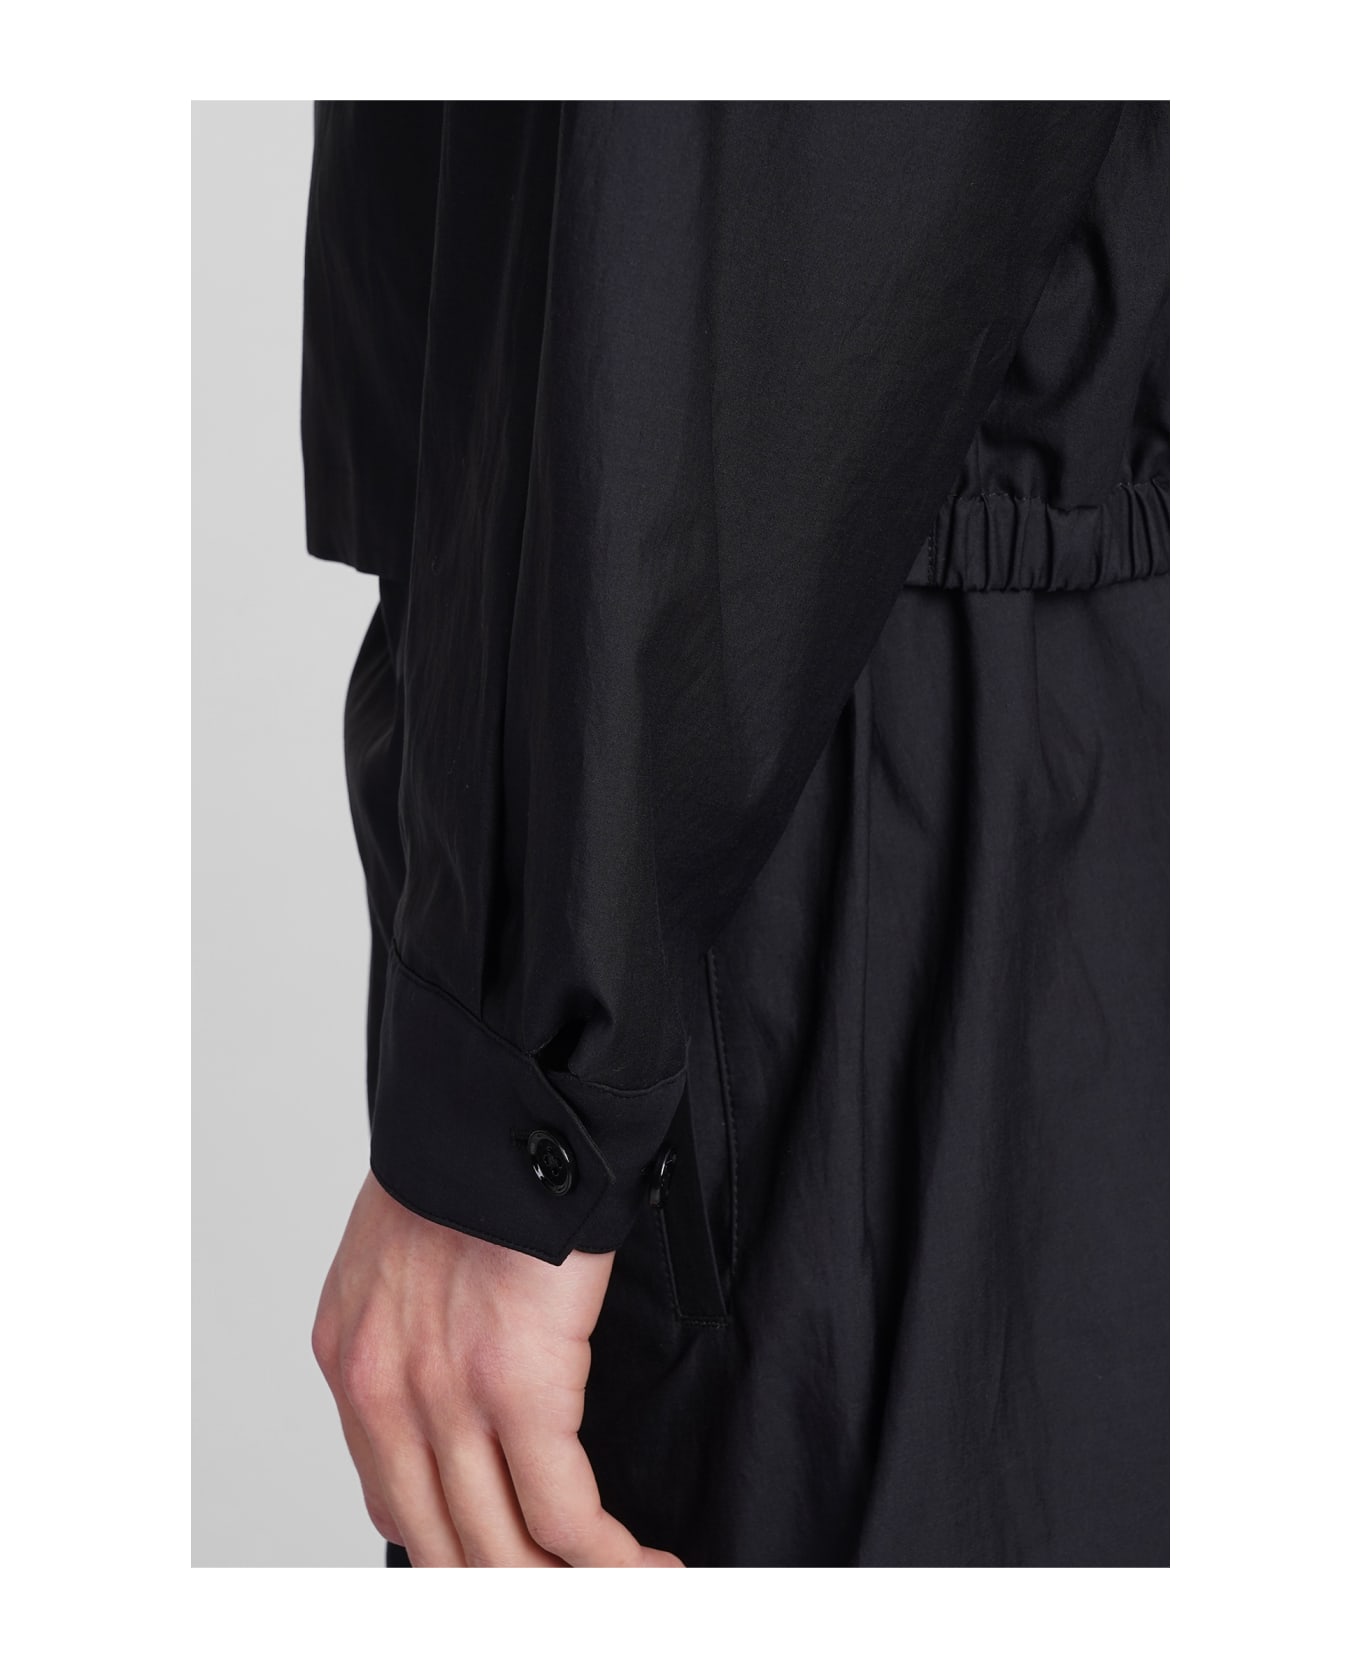 Lemaire Casual Jacket In Black Cotton - black ジャケット